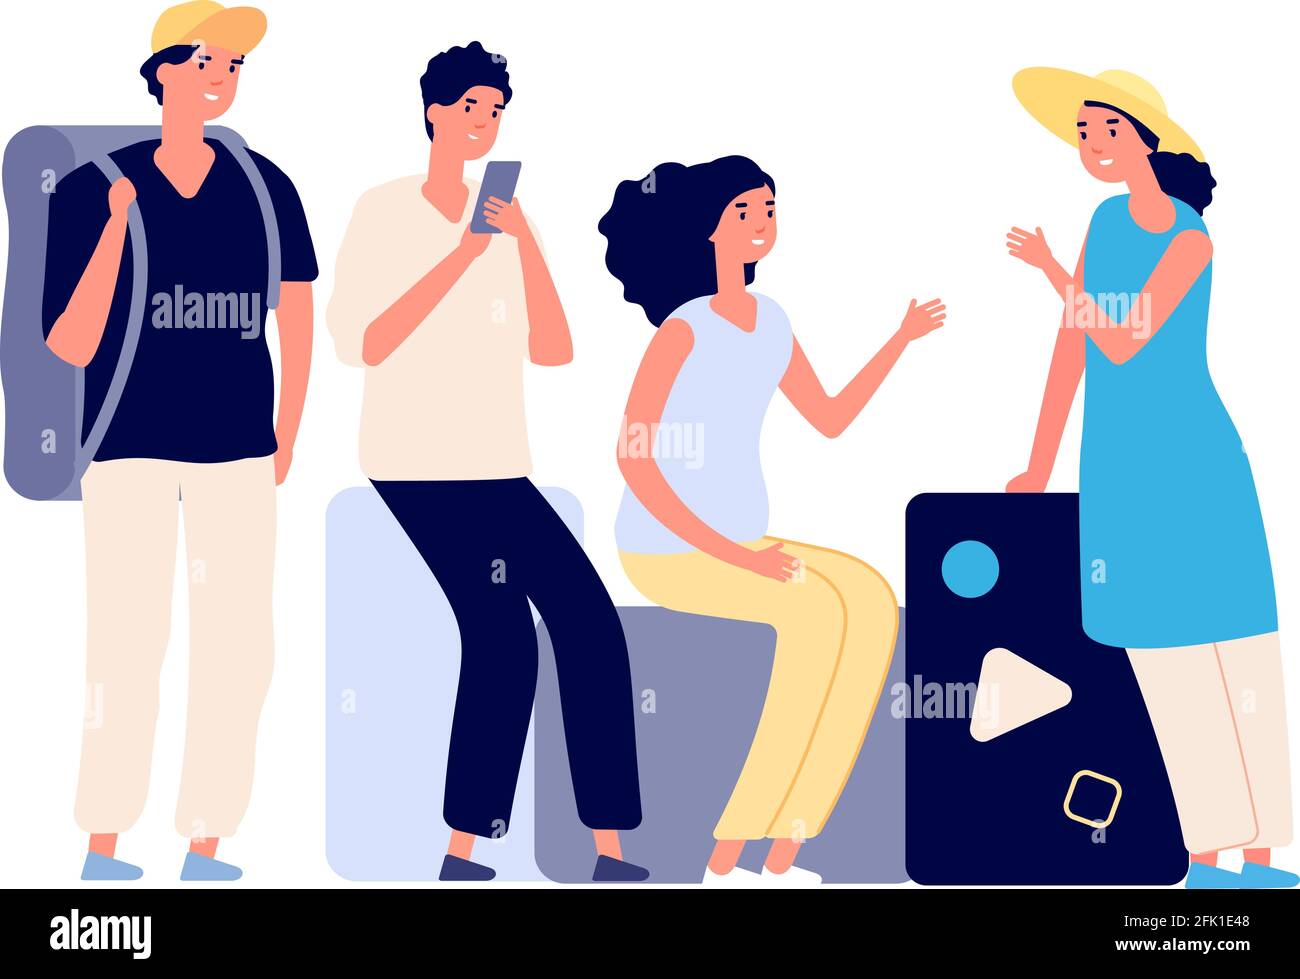 Friends vacations. People with luggage, flat tourists talking. Friendship travellers, boys and girls wait transport on bags vector illustration Stock Vector